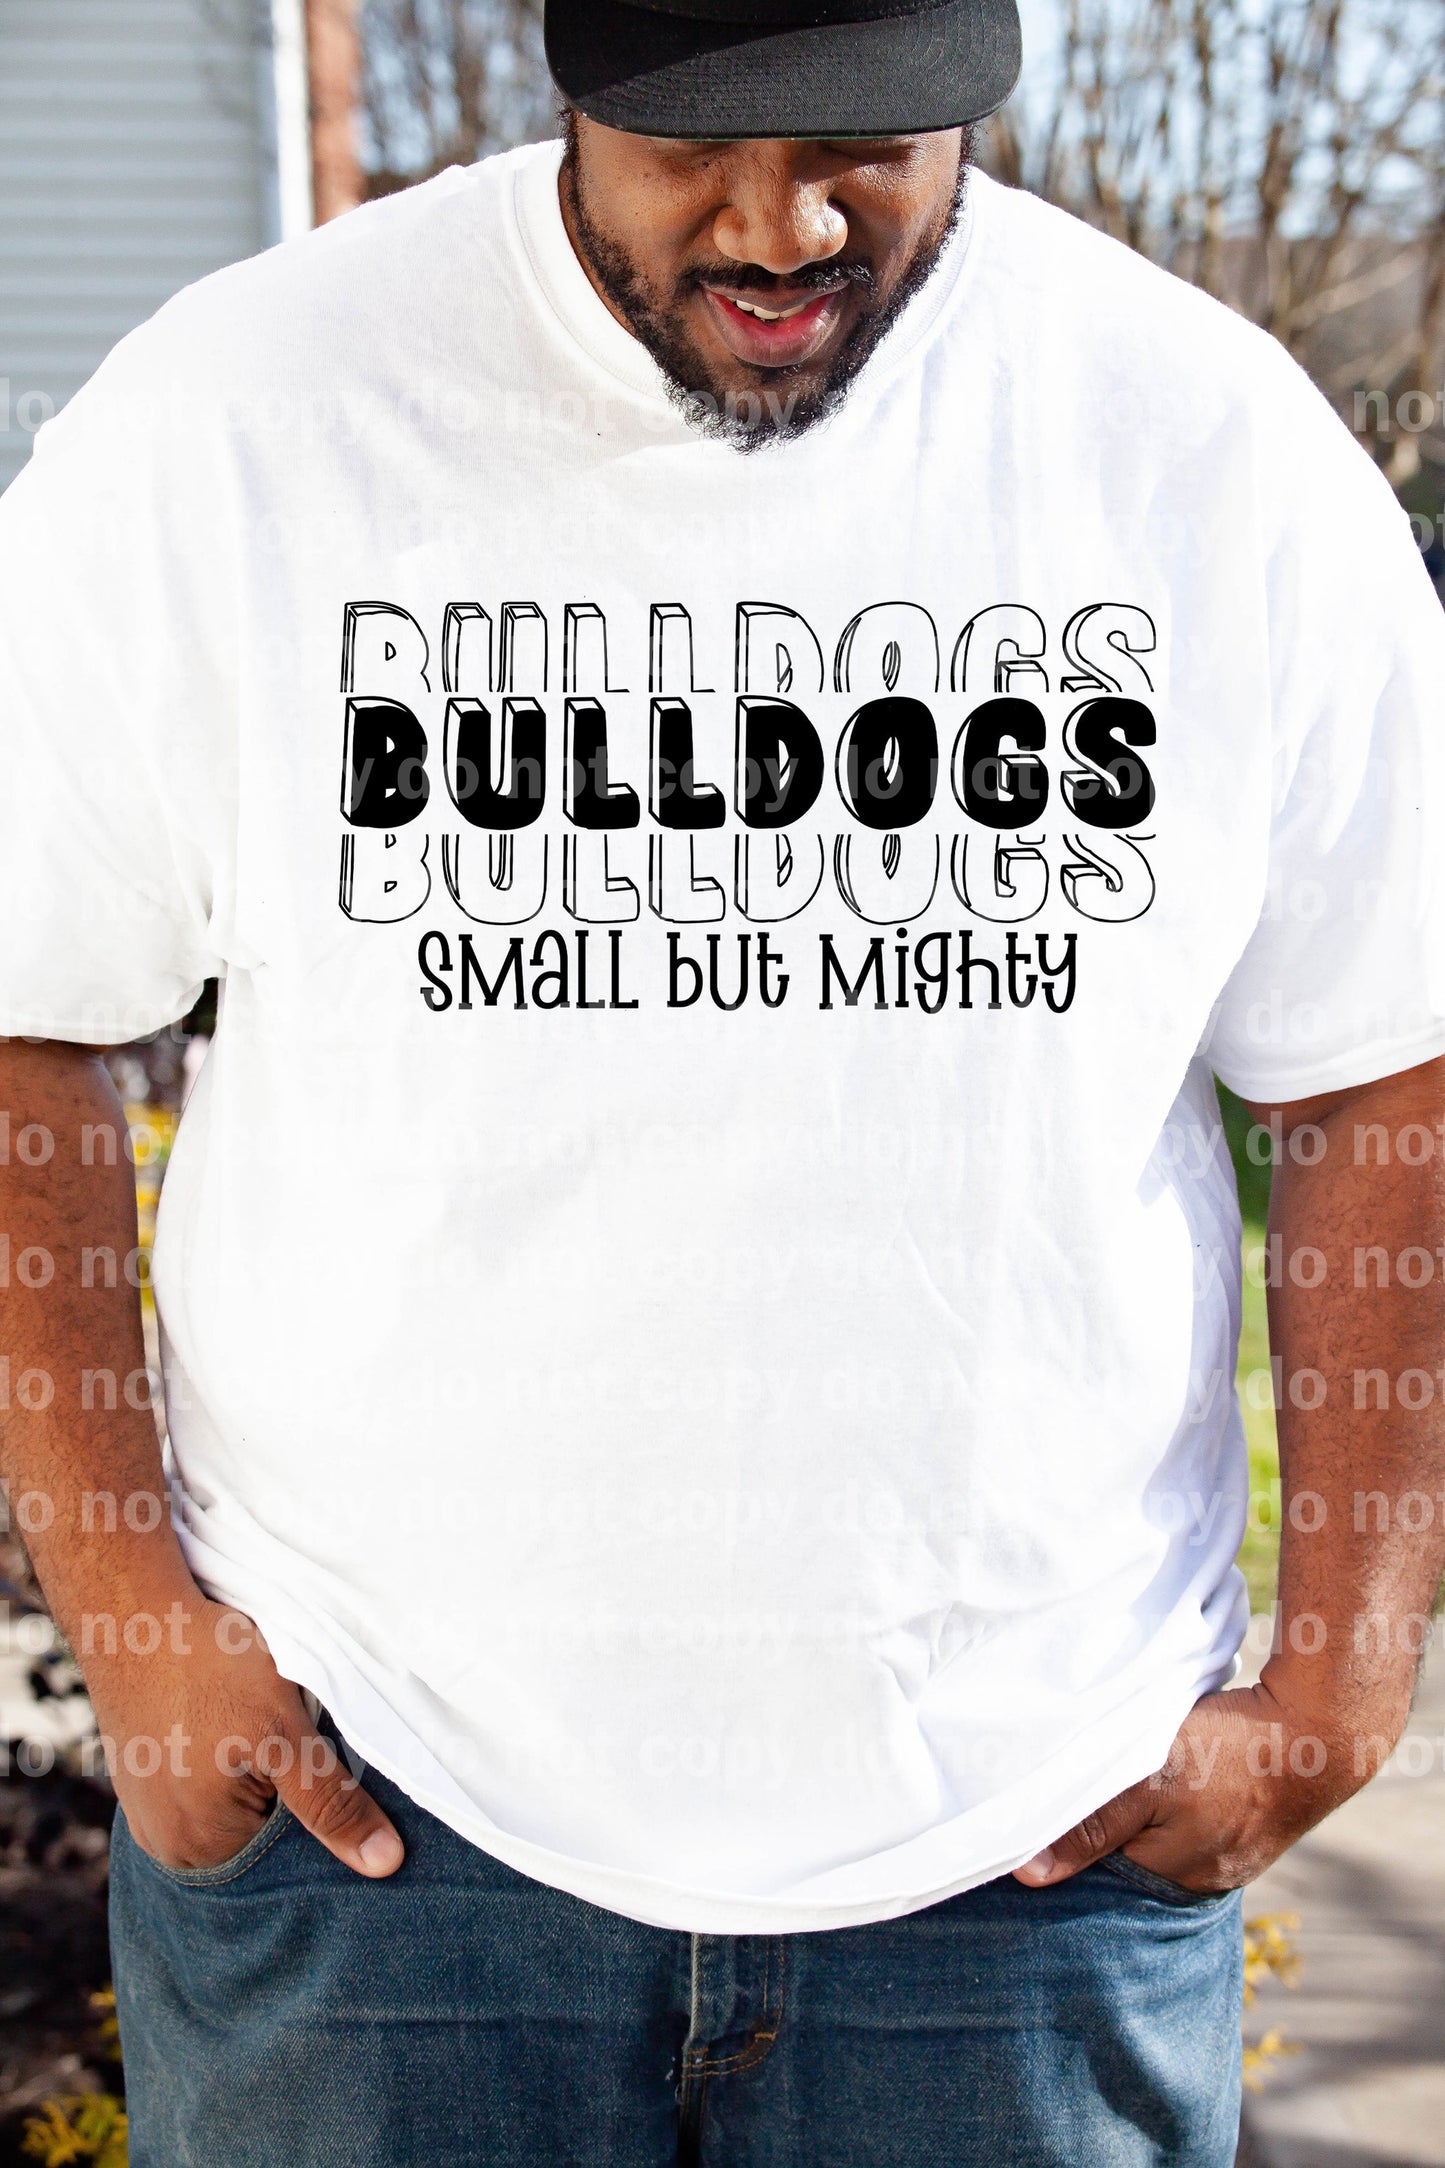 Bulldogs Small But Mighty Black/White Dream Print or Sublimation Print